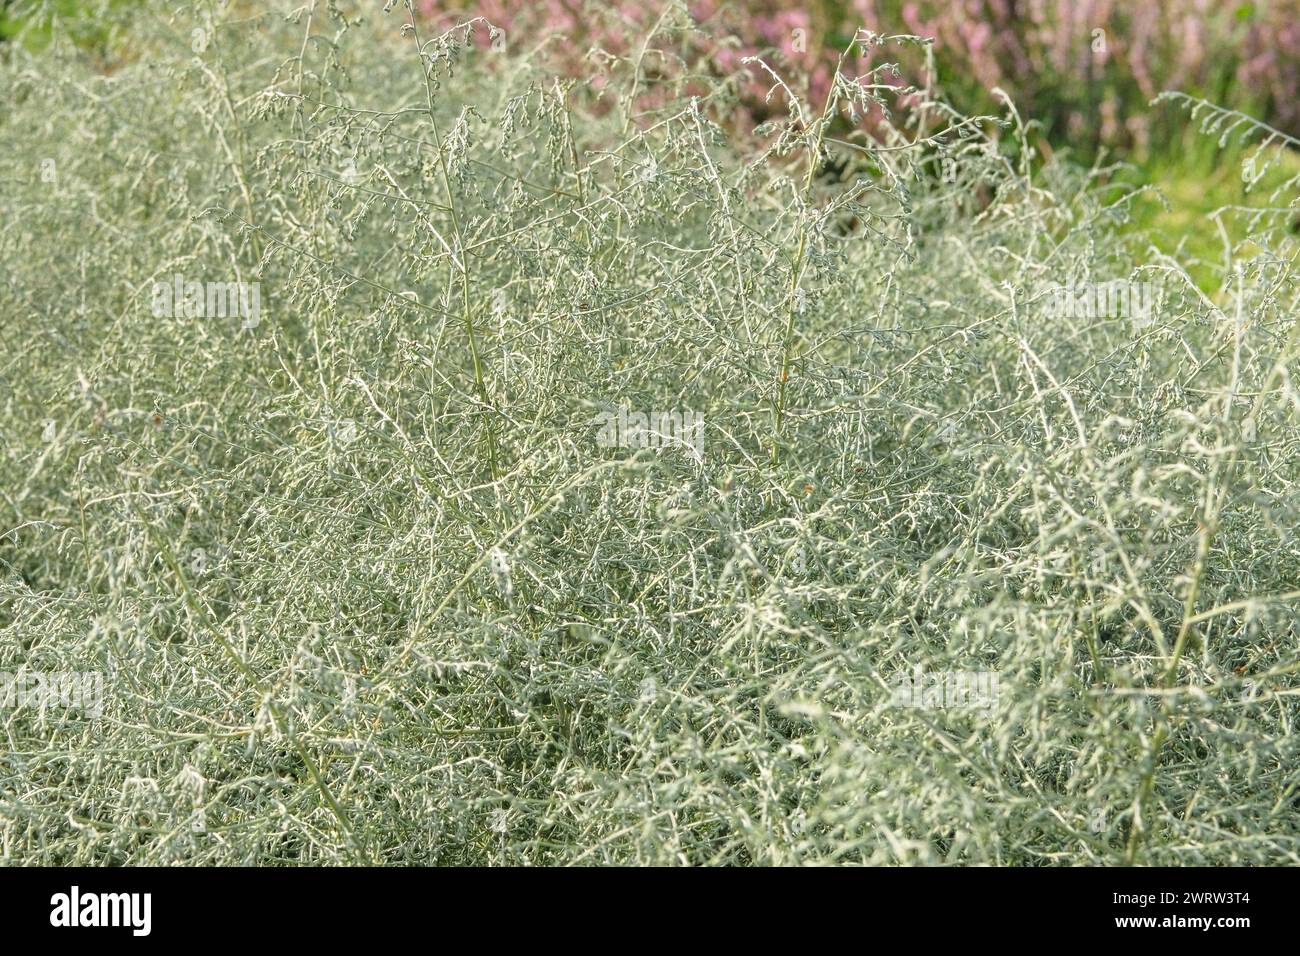 Asparagus albus grow in garden. Aromatic plant is growing outdoors. Growing spices for further use. Farming and harvesting. Stock Photo